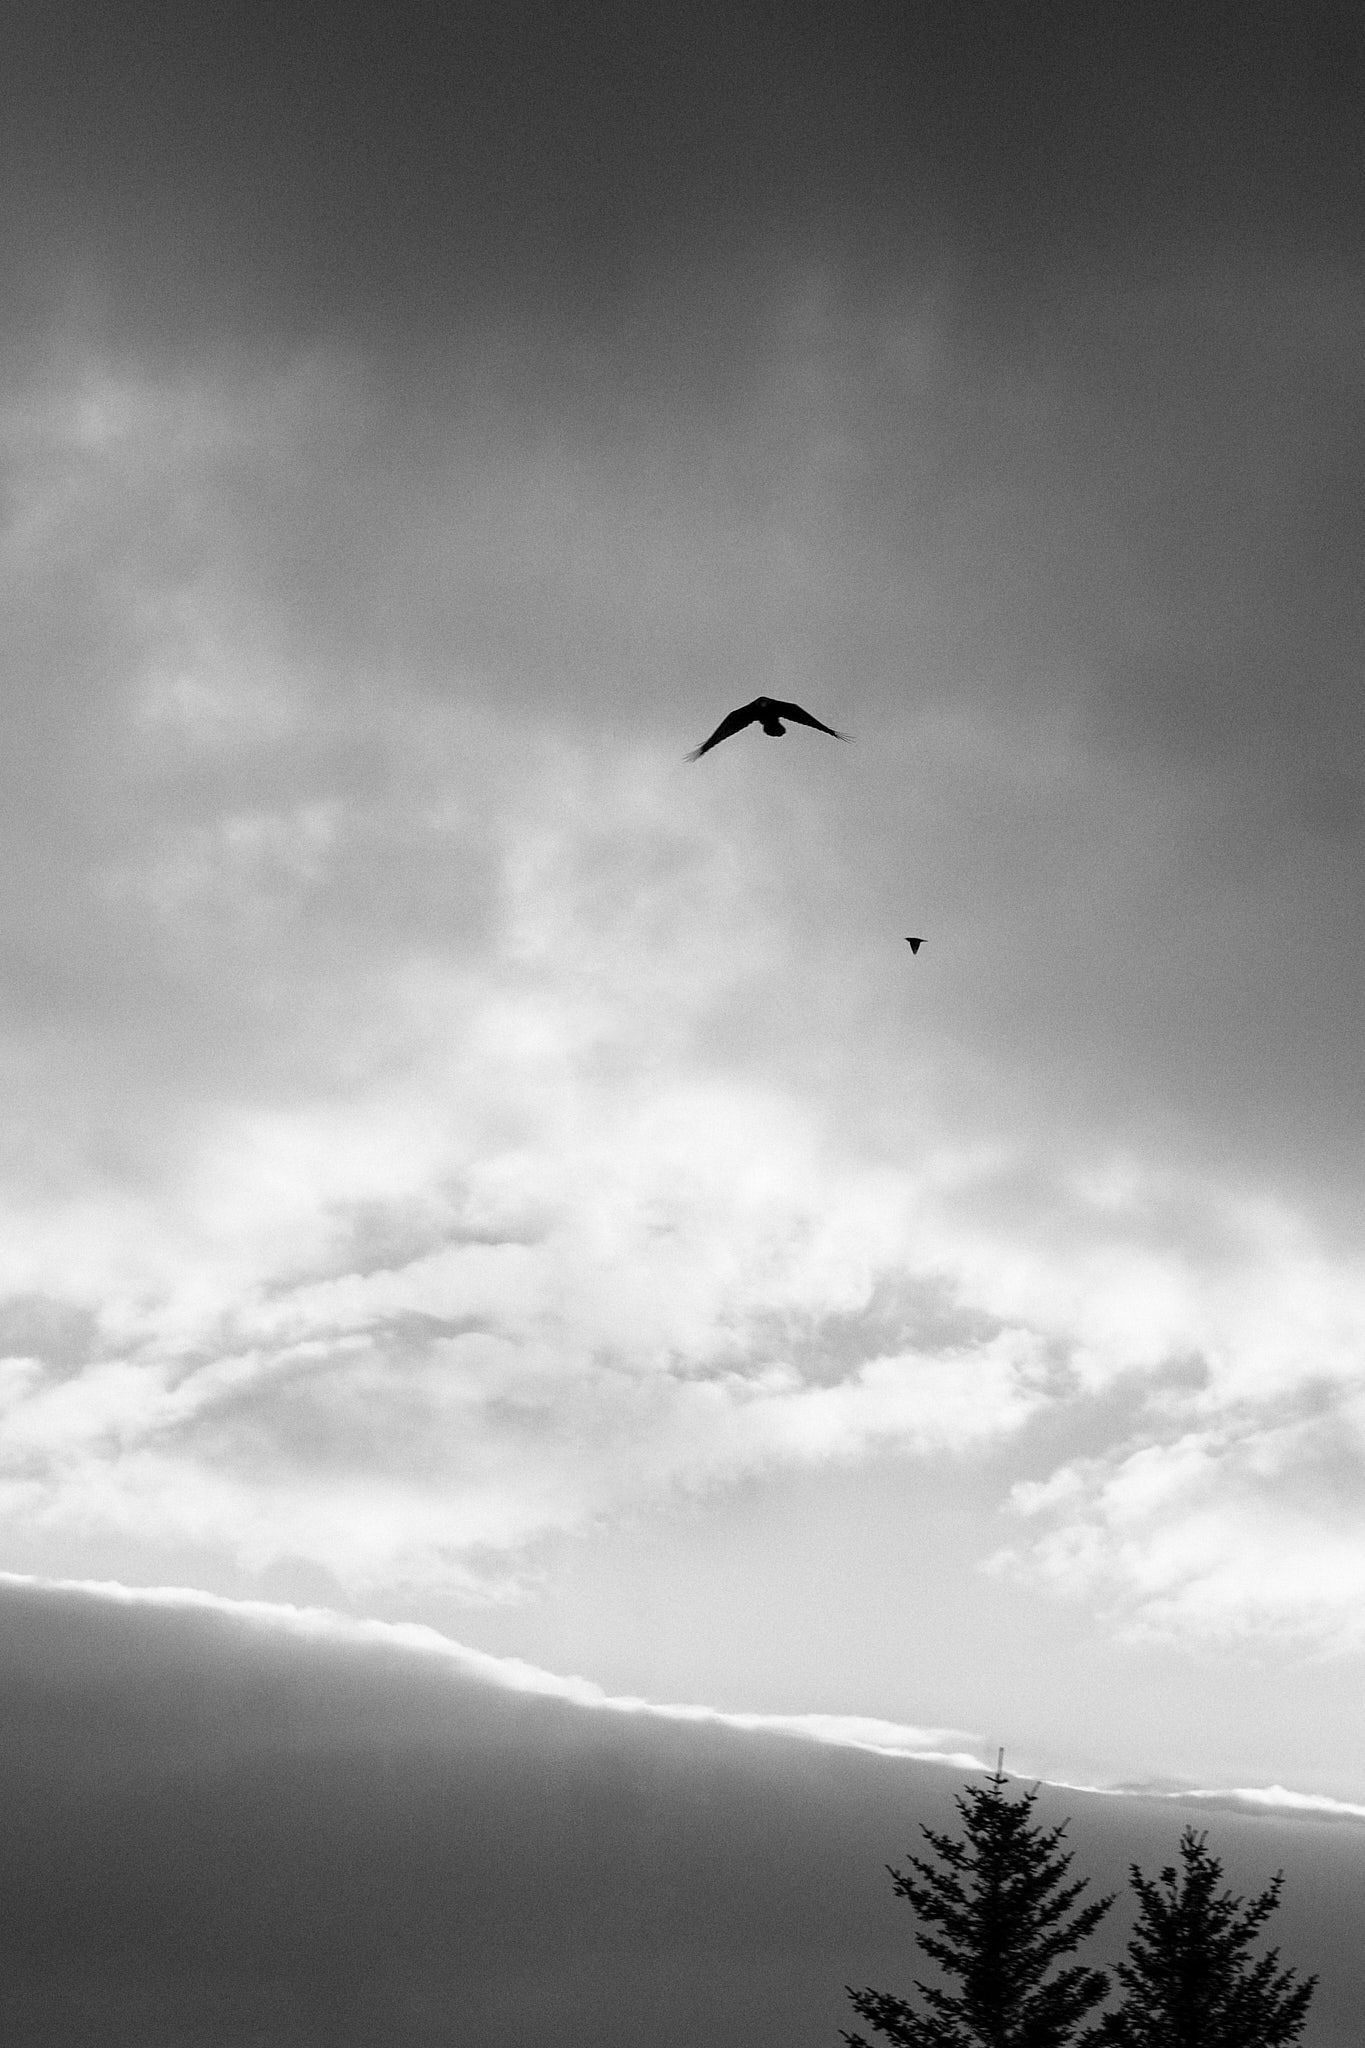 Raven flies. Dramatic looking clouds provide a backdrop